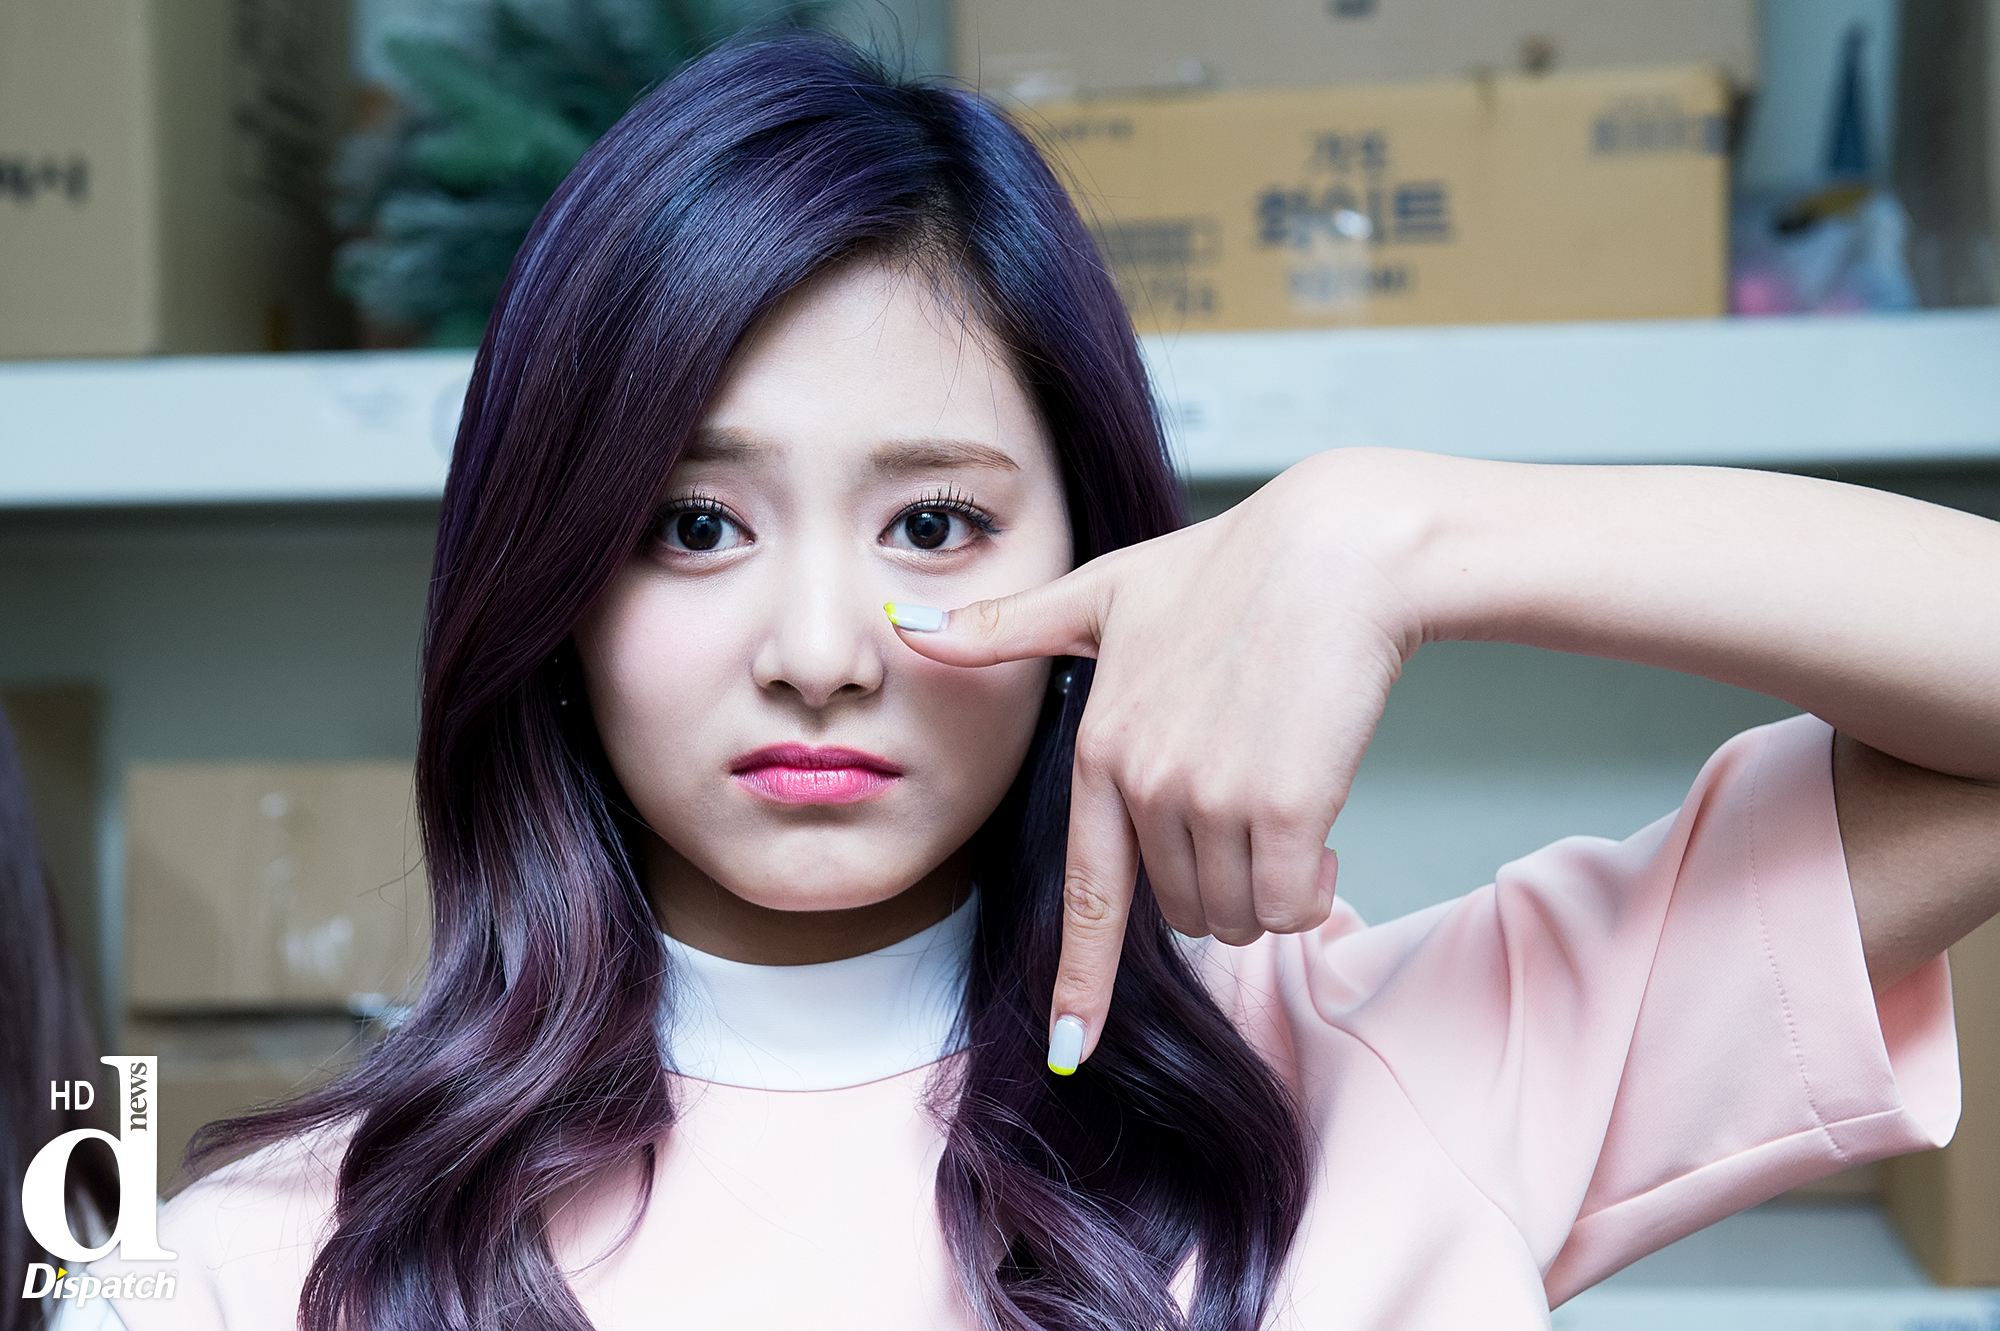 Twice Members Will Captivate You With Their Adorable Aegyo Photos